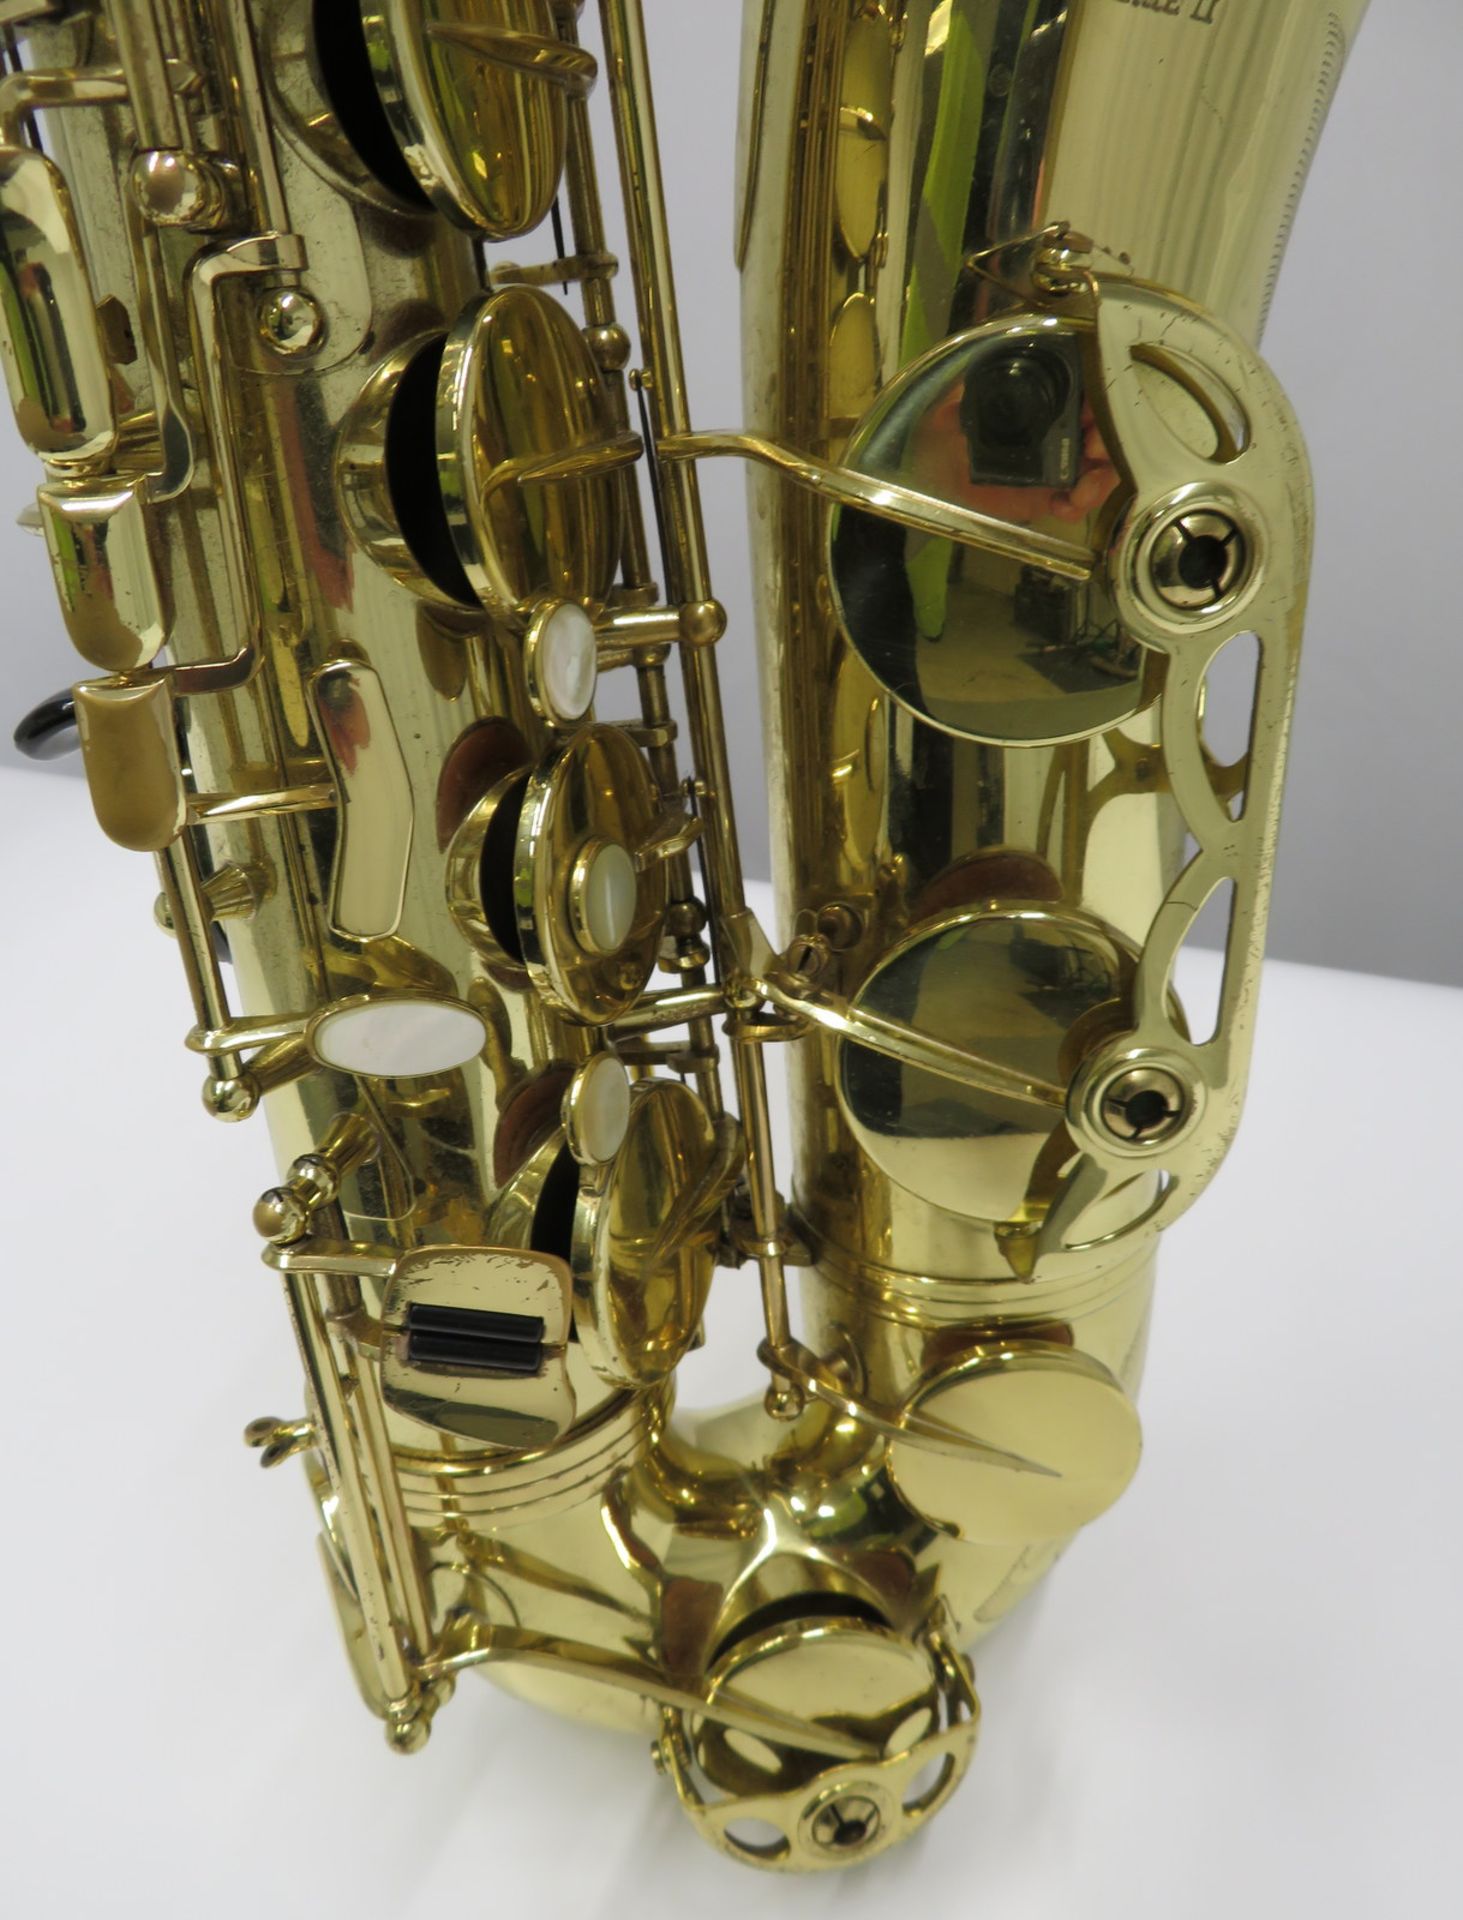 Henri Selmer 80 super action series 2 tenor saxophone with case. Serial number: N.613456. - Image 10 of 17